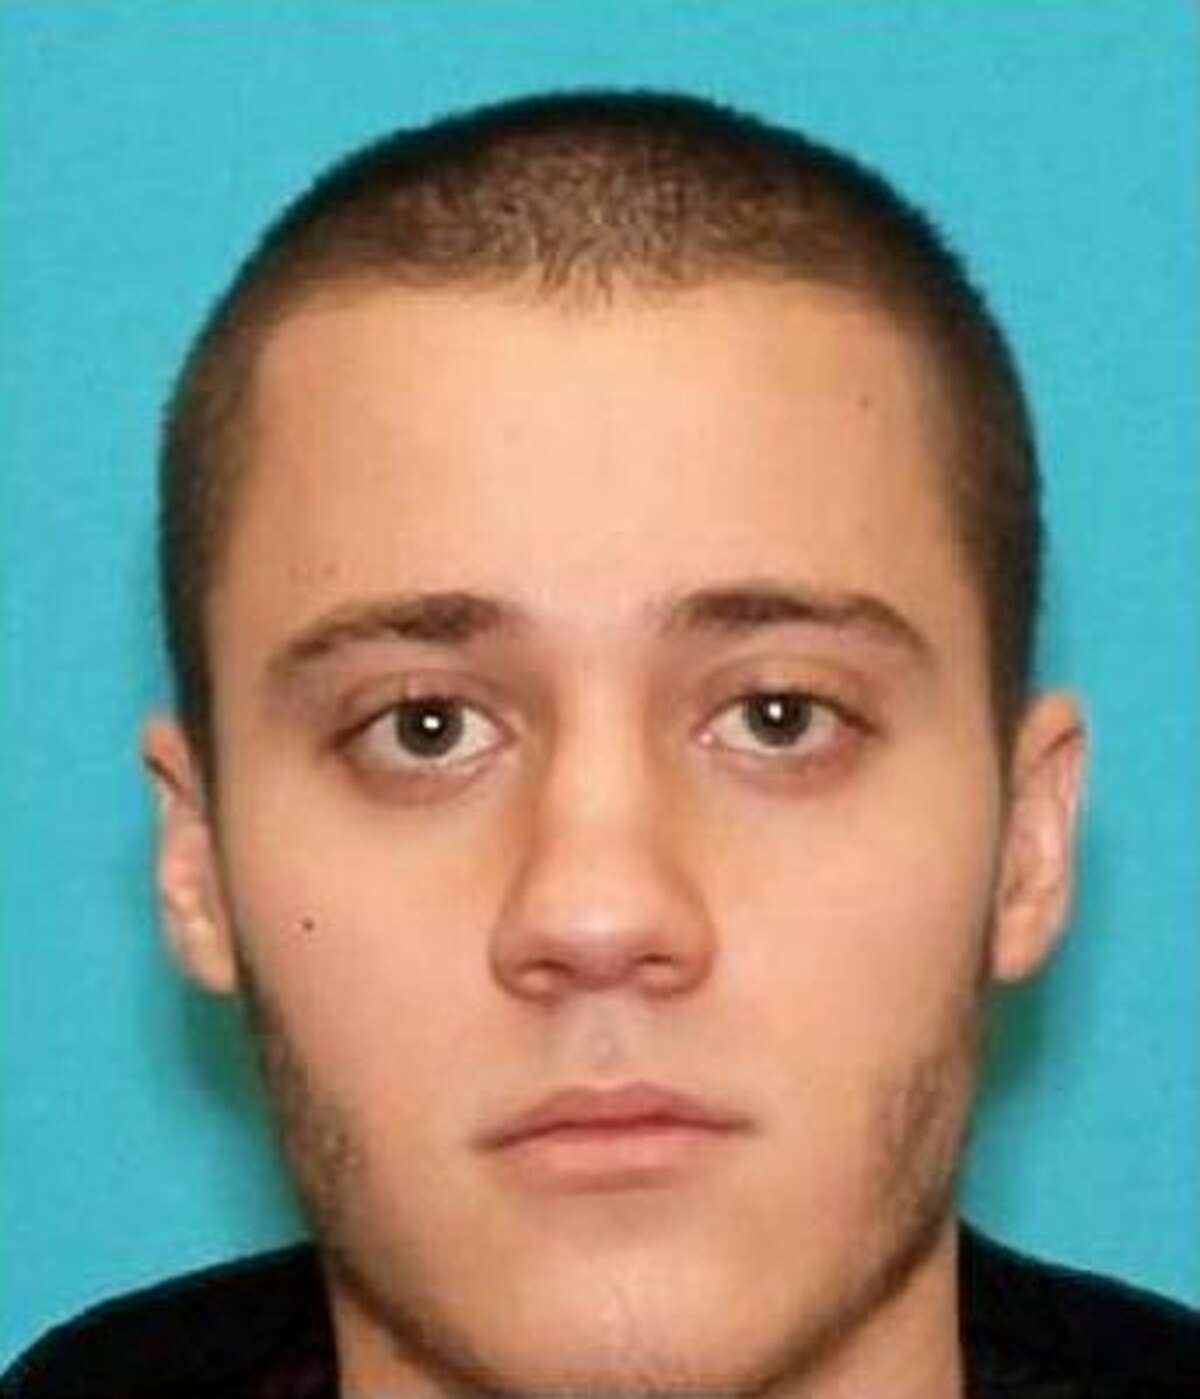 This photo provided by the FBI shows Paul Ciancia, 23. Ciancia carrying a note that said he wanted to "kill TSA" pulled a semi-automatic rifle from a bag and shot his way past a security checkpoint at Los Angeles International Airport on Friday, Nov. 1, 2013 killing one Transportation Security Administration officer and wounding two others, authorities said.